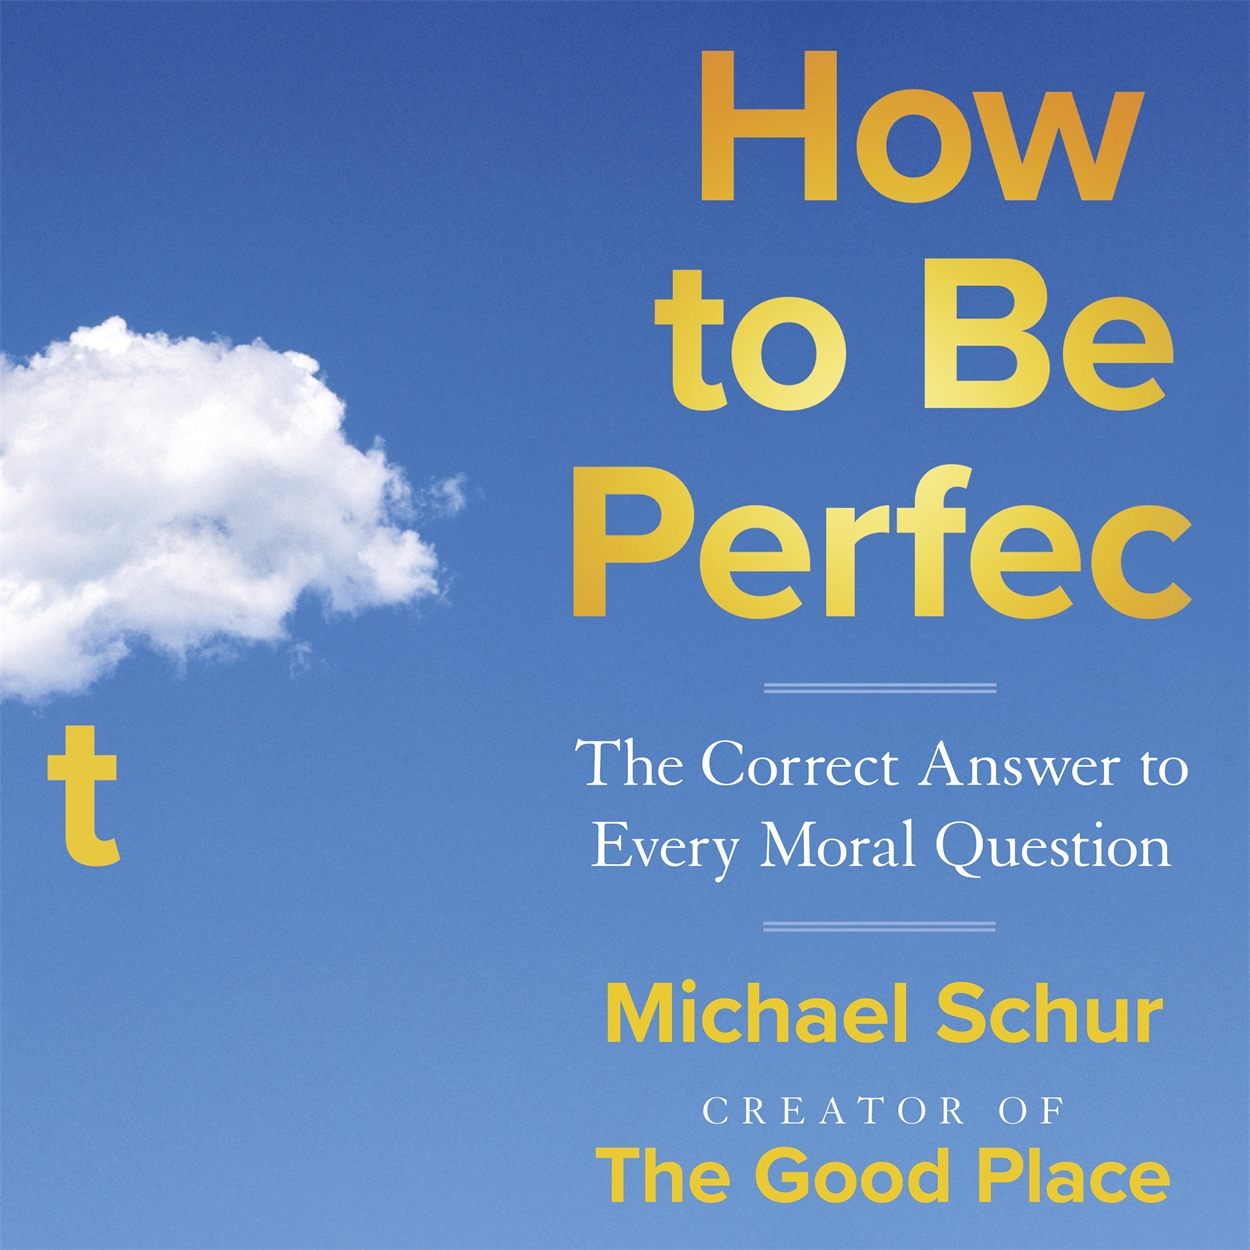 how to be perfect book michael schur